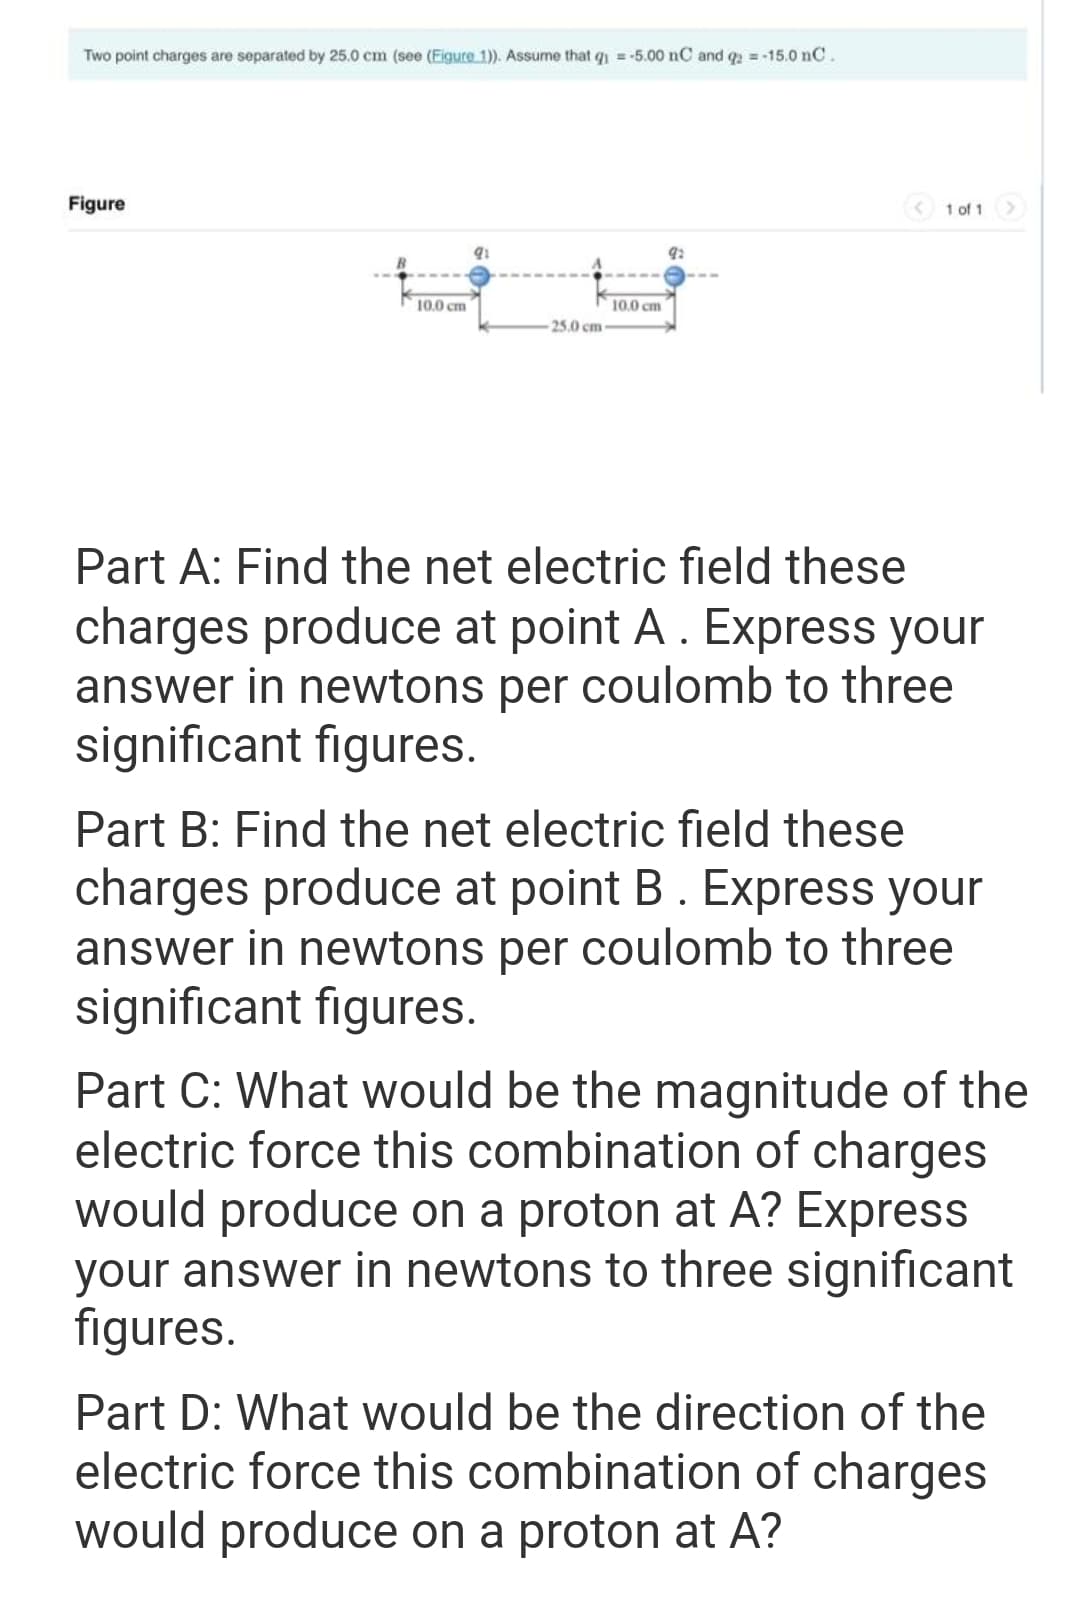 Two point charges are separated by 25.0 cm (see (Figure 1)). Assume that q = -5.00 nC and q2 = -15.0 nC.
Figure
10.0 cm
91
25.0 cm
10.0 cm
1 of 1
Part A: Find the net electric field these
charges produce at point A. Express your
answer in newtons per coulomb to three
significant figures.
Part B: Find the net electric field these
charges produce at point B. Express your
answer in newtons per coulomb to three
significant figures.
Part C: What would be the magnitude of the
electric force this combination of charges
would produce on a proton at A? Express
your answer in newtons to three significant
figures.
Part D: What would be the direction of the
electric force this combination of charges
would produce on a proton at A?